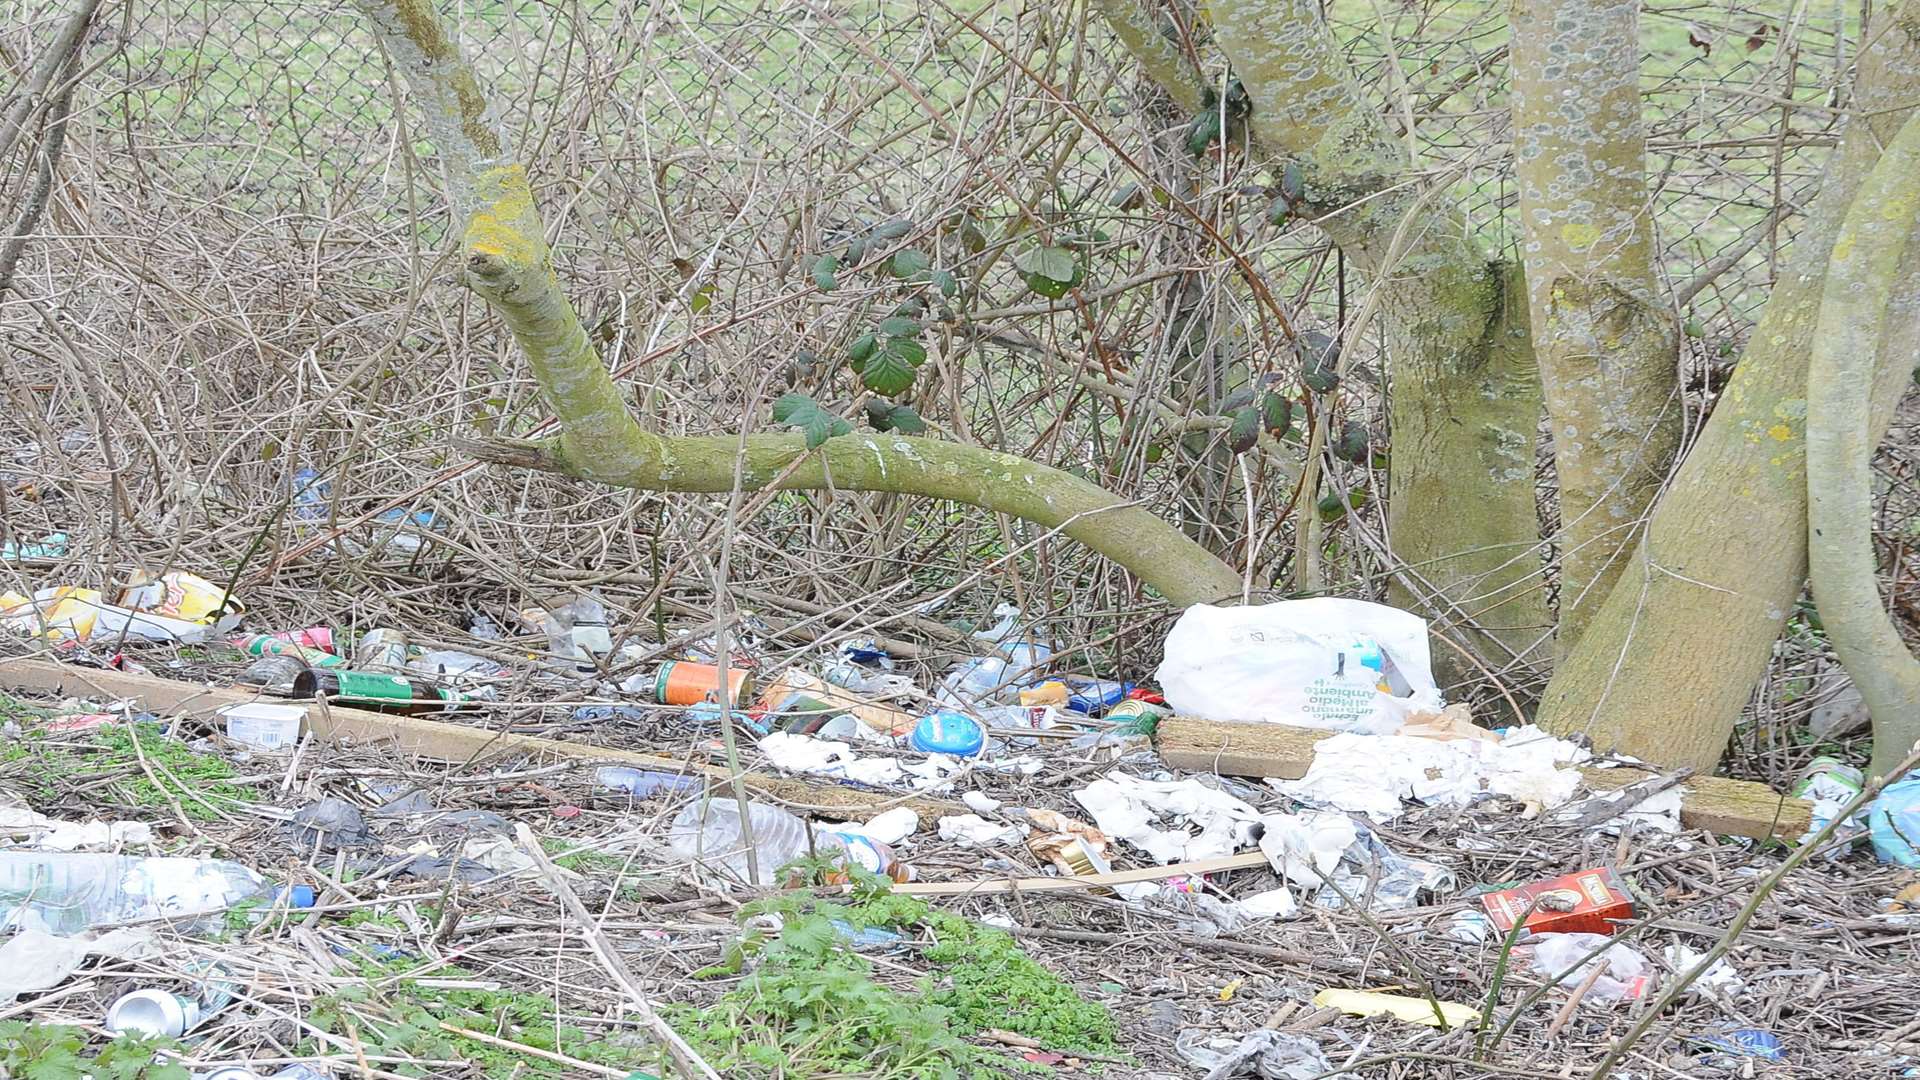 Medway Road residents have been warned to expect council deep clean.